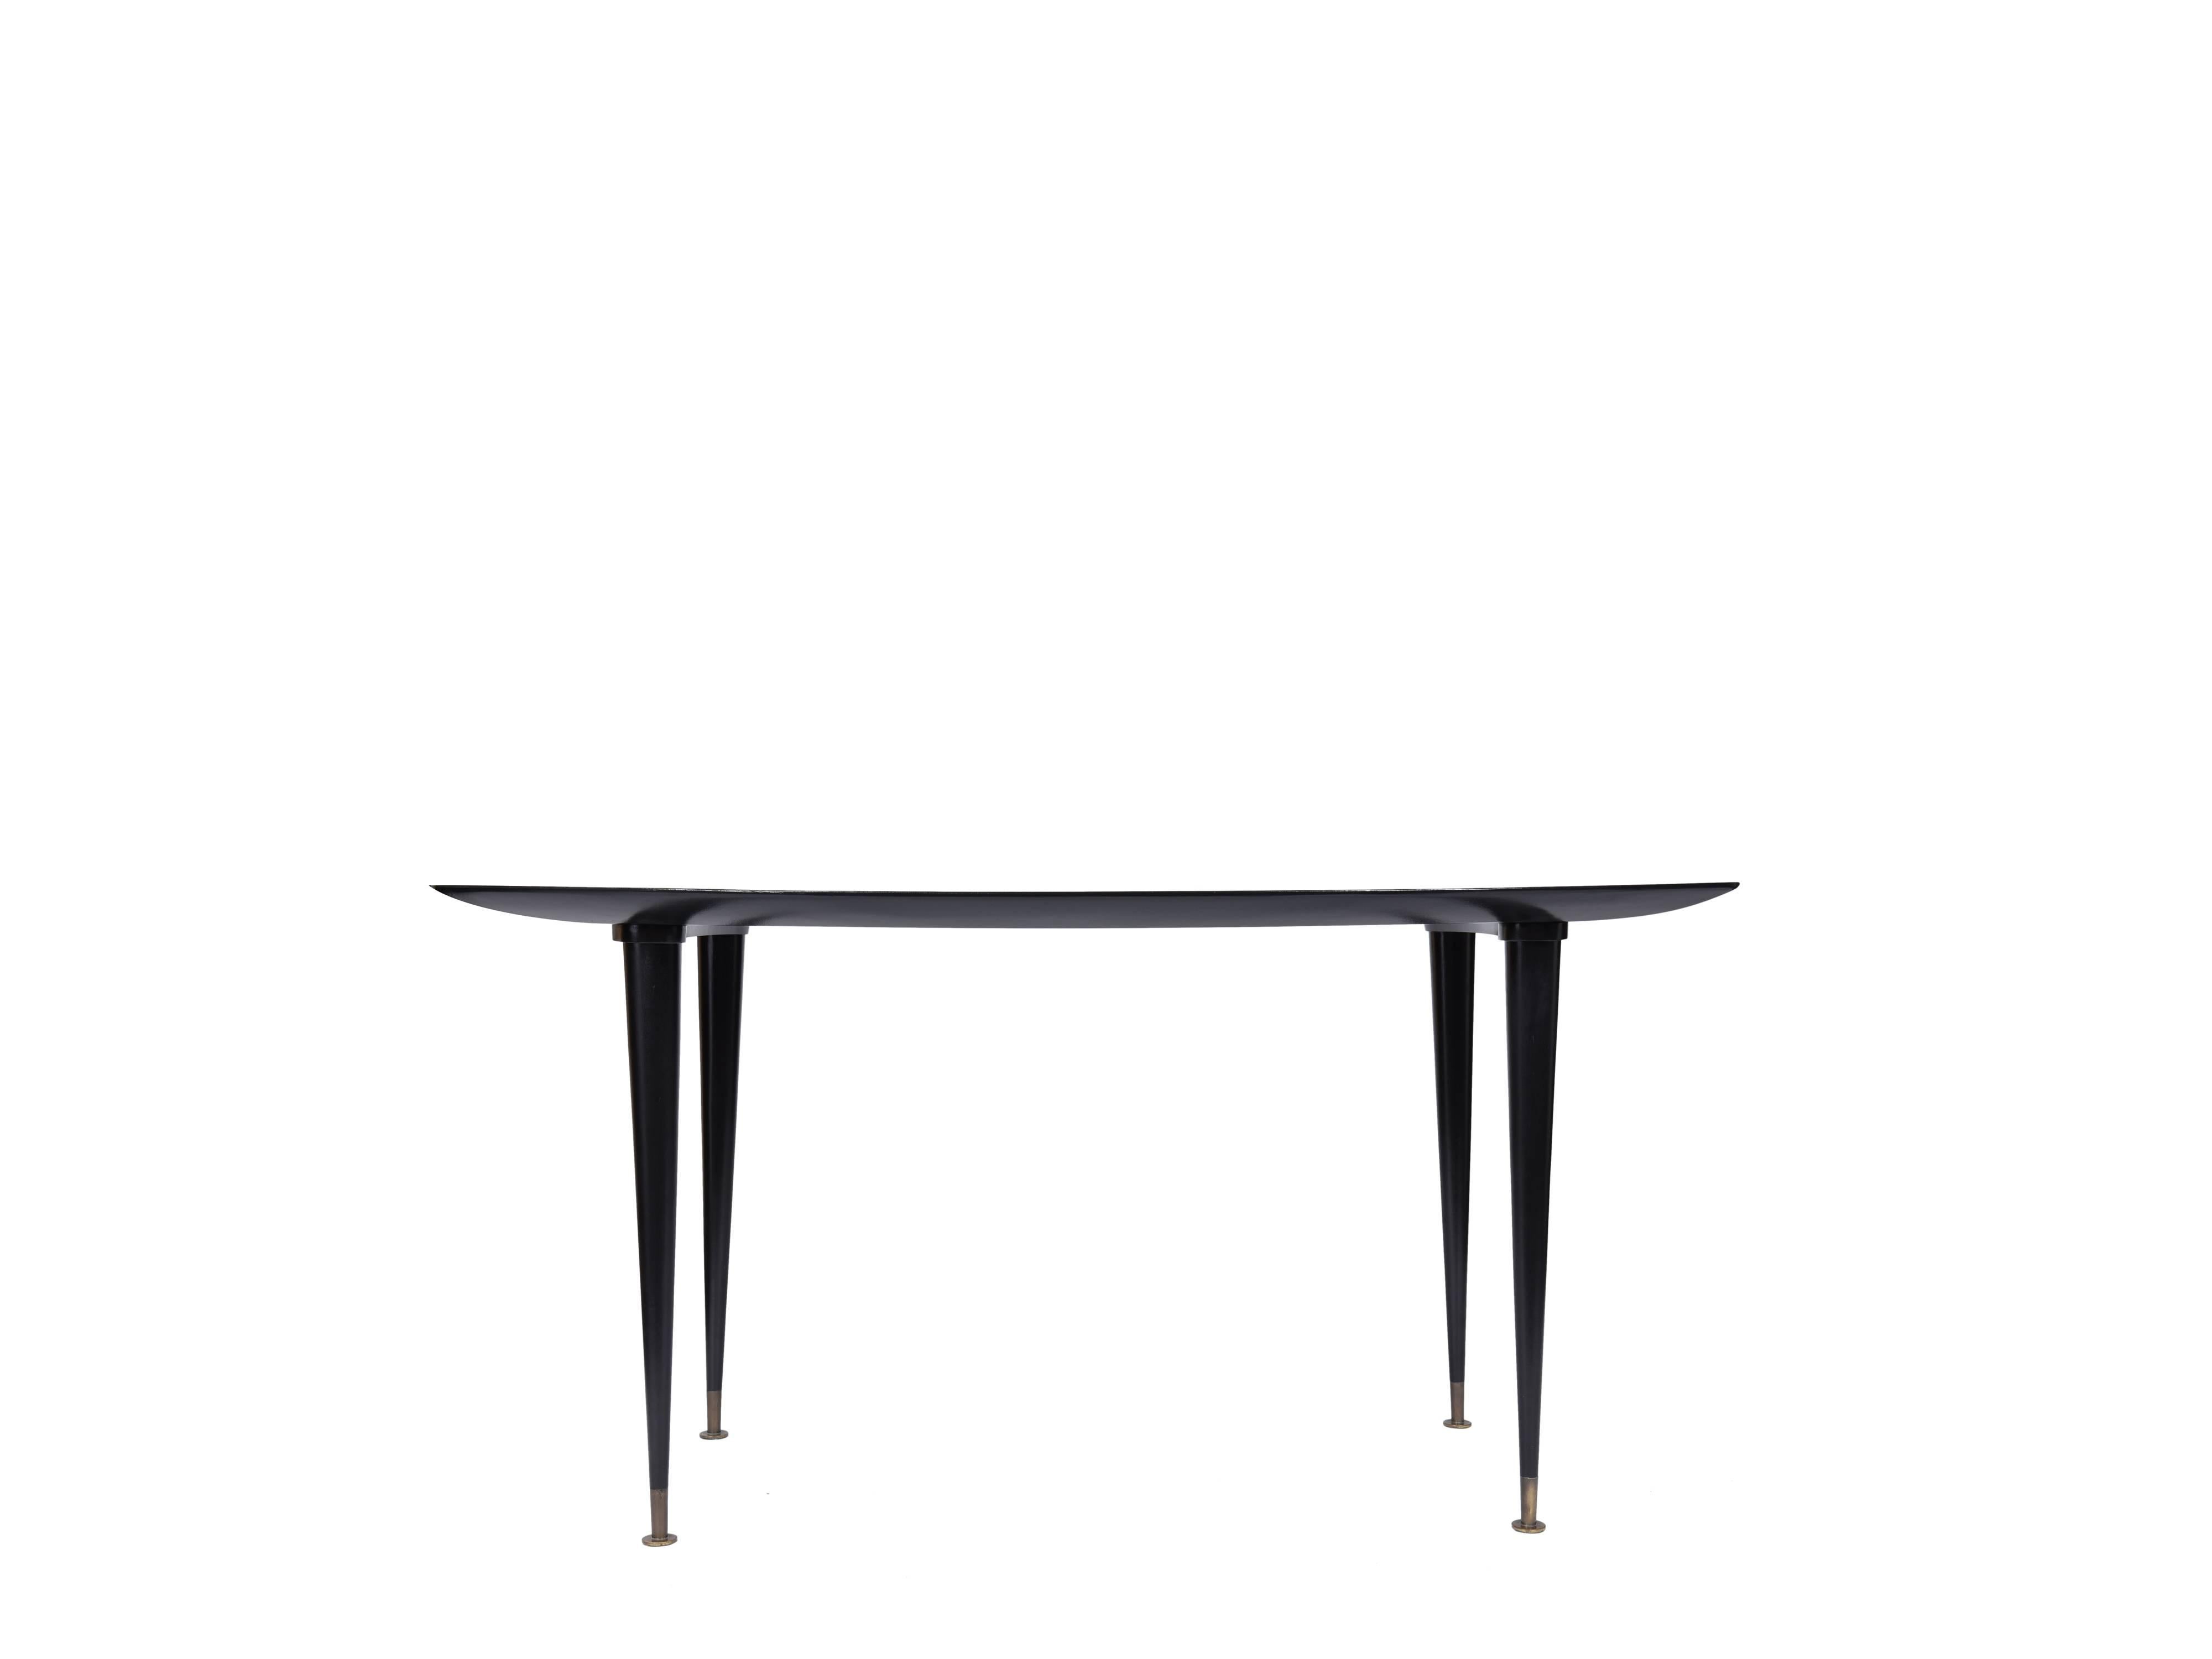 Giuseppe Scapinelli Midcentury brazilian Dining Table in Black Lacquered Wood

This beautiful black lacquered wooden dining table was designed by Giuseppe Scapinelli between the 1950s and 1960s.
Its black and shiny finish contrasts with the gold